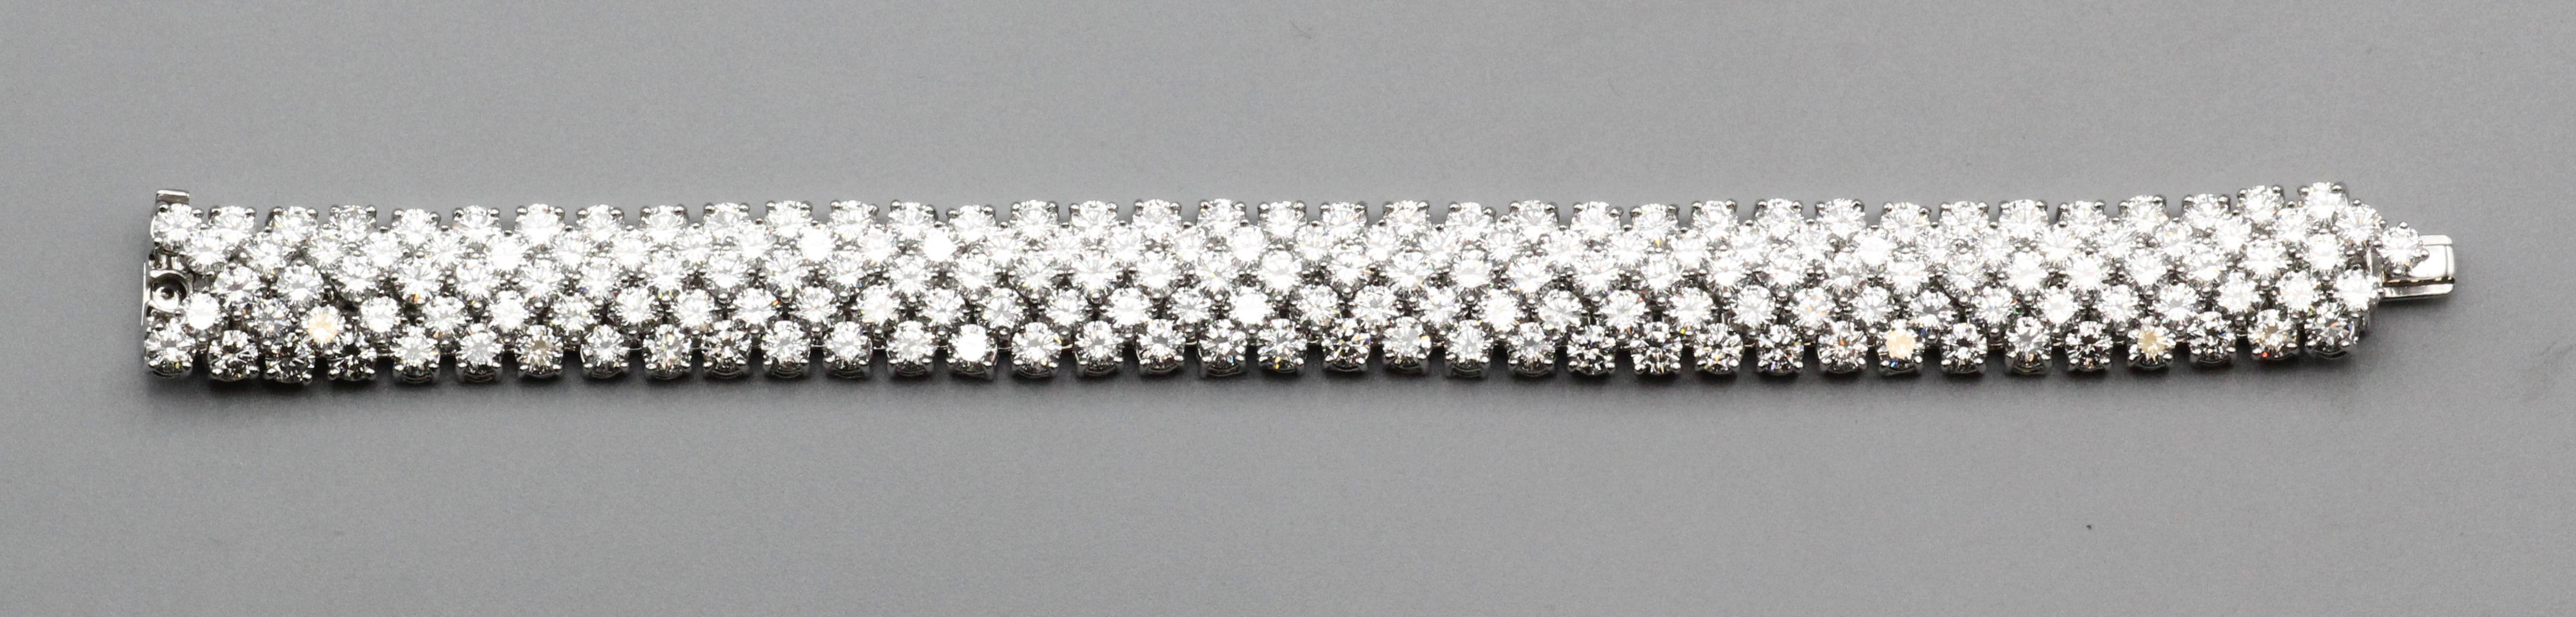 Hammerman Brothers Flexible Diamond Platinum 5 Row Strap Bracelet In Good Condition For Sale In New York, NY